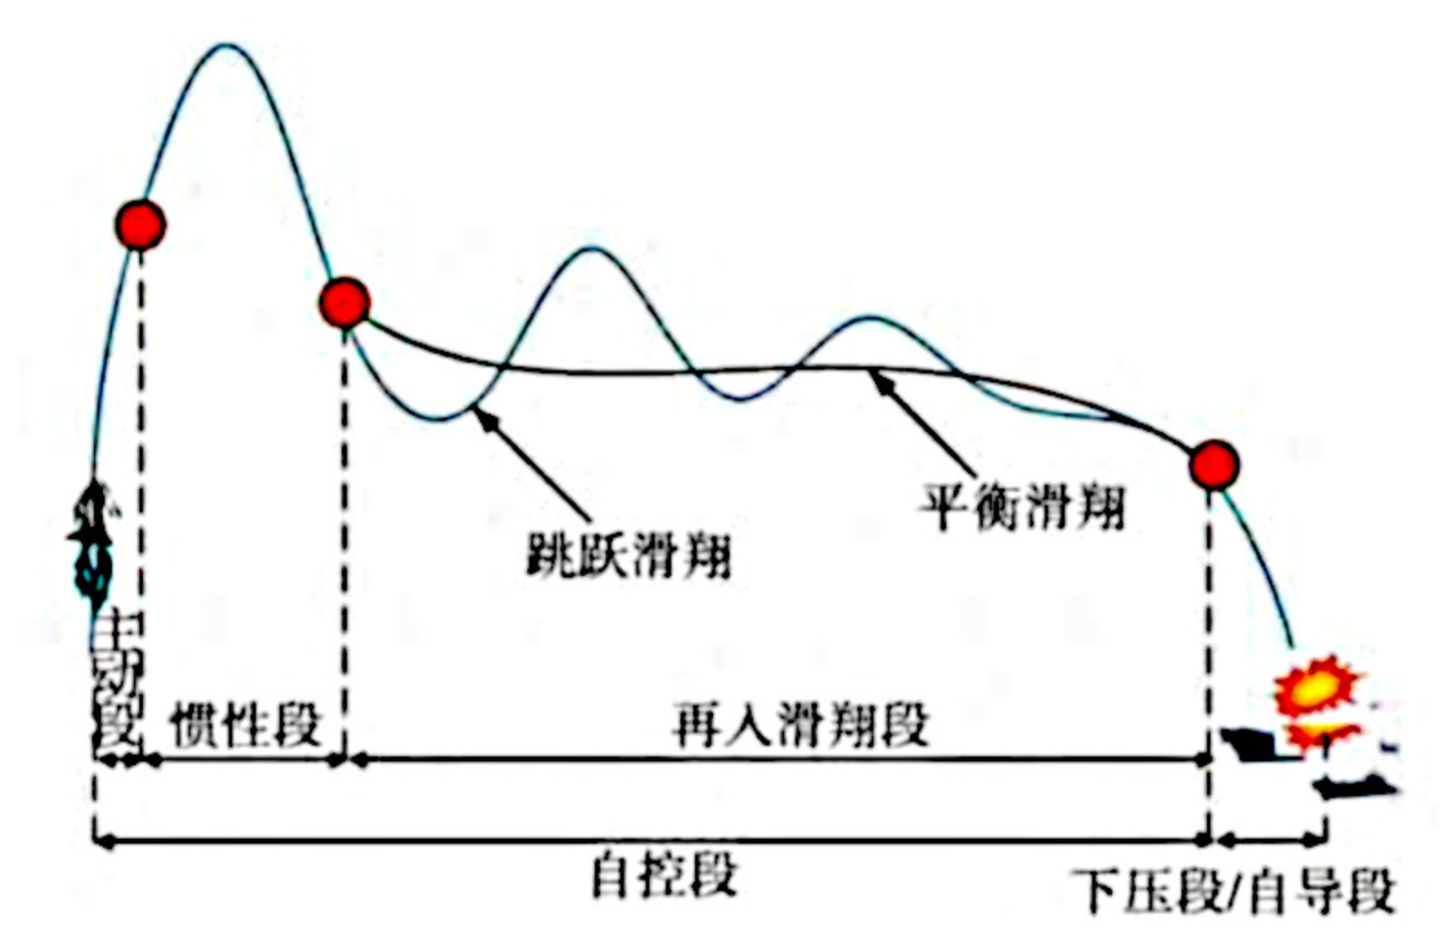 A Chinese graphic showing a ballistic missile with the ‘porpoising’ or skip-glide trajectory associated with the CM-401. <em>via Chinese internet</em>